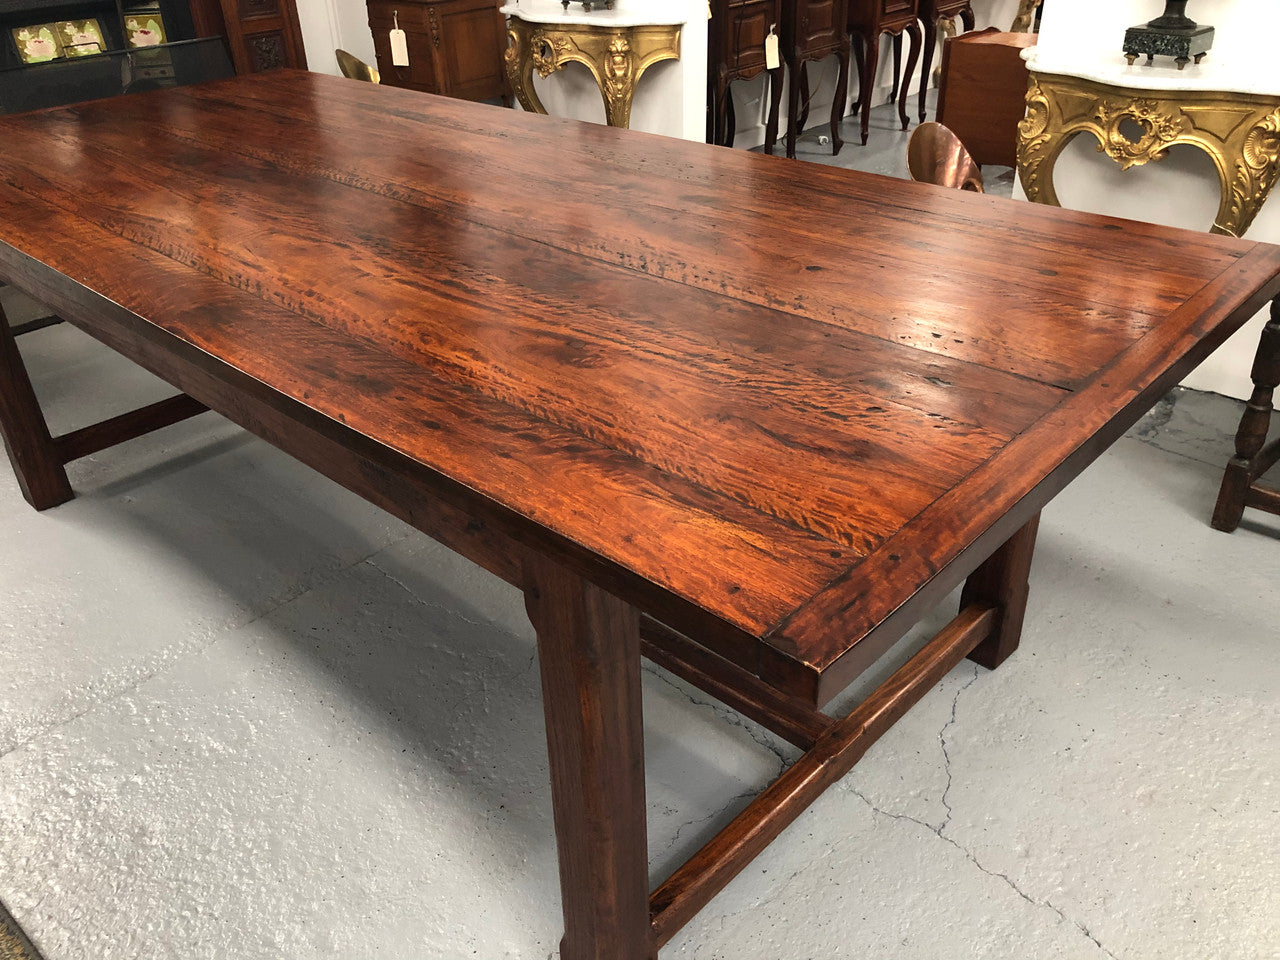 French style reclaimed timber Farmhouse table. Made from reclaimed Red Gum timber this table is very solid and has a great width at 105 cm. It is in very good original detailed condition.